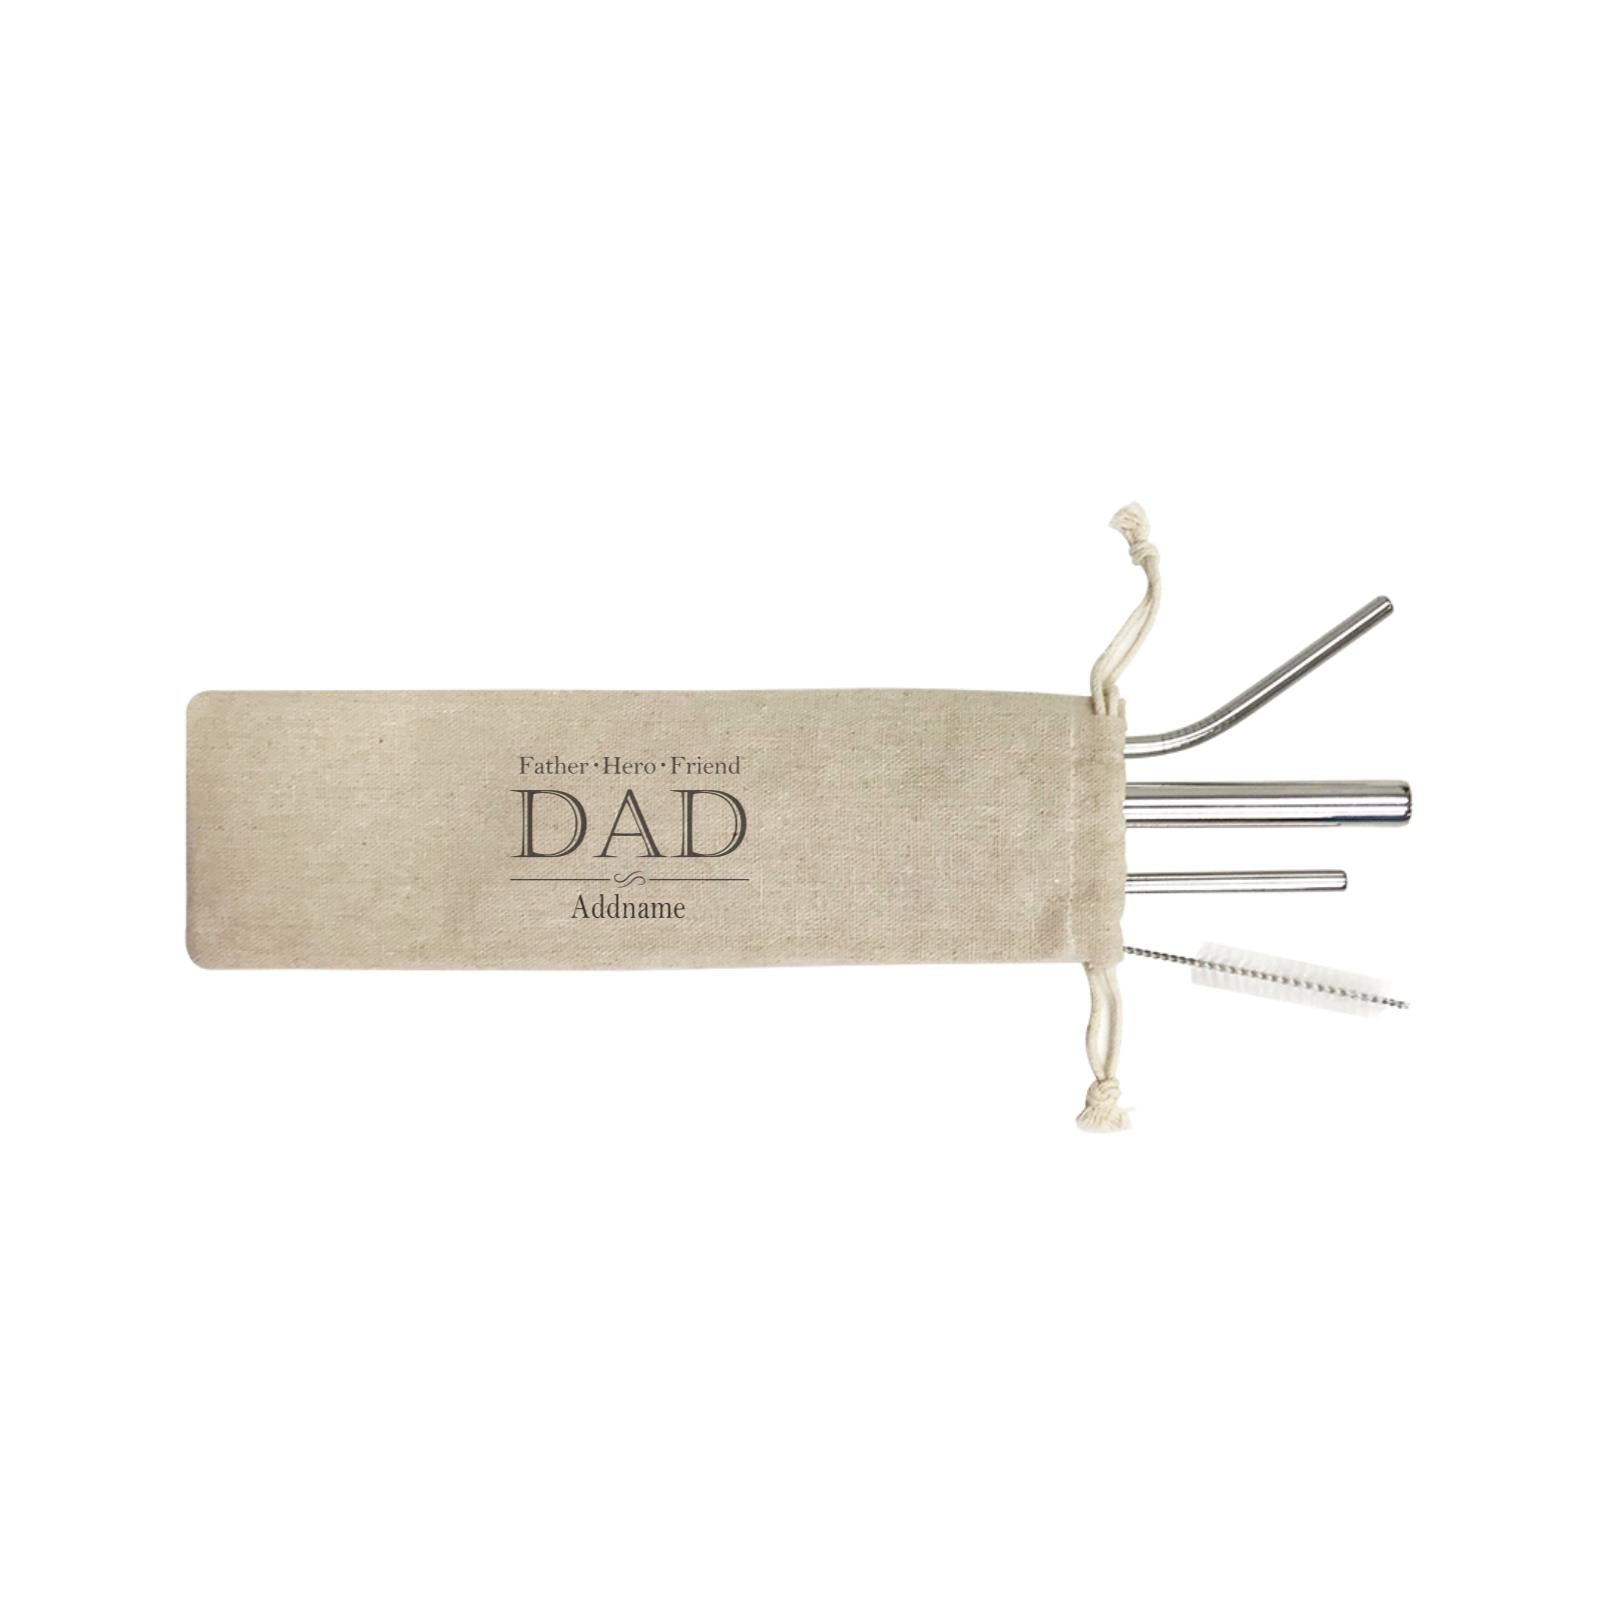 Father Hero Friend Dad Addname SB 4-In-1 Stainless Steel Straw Set in Satchel